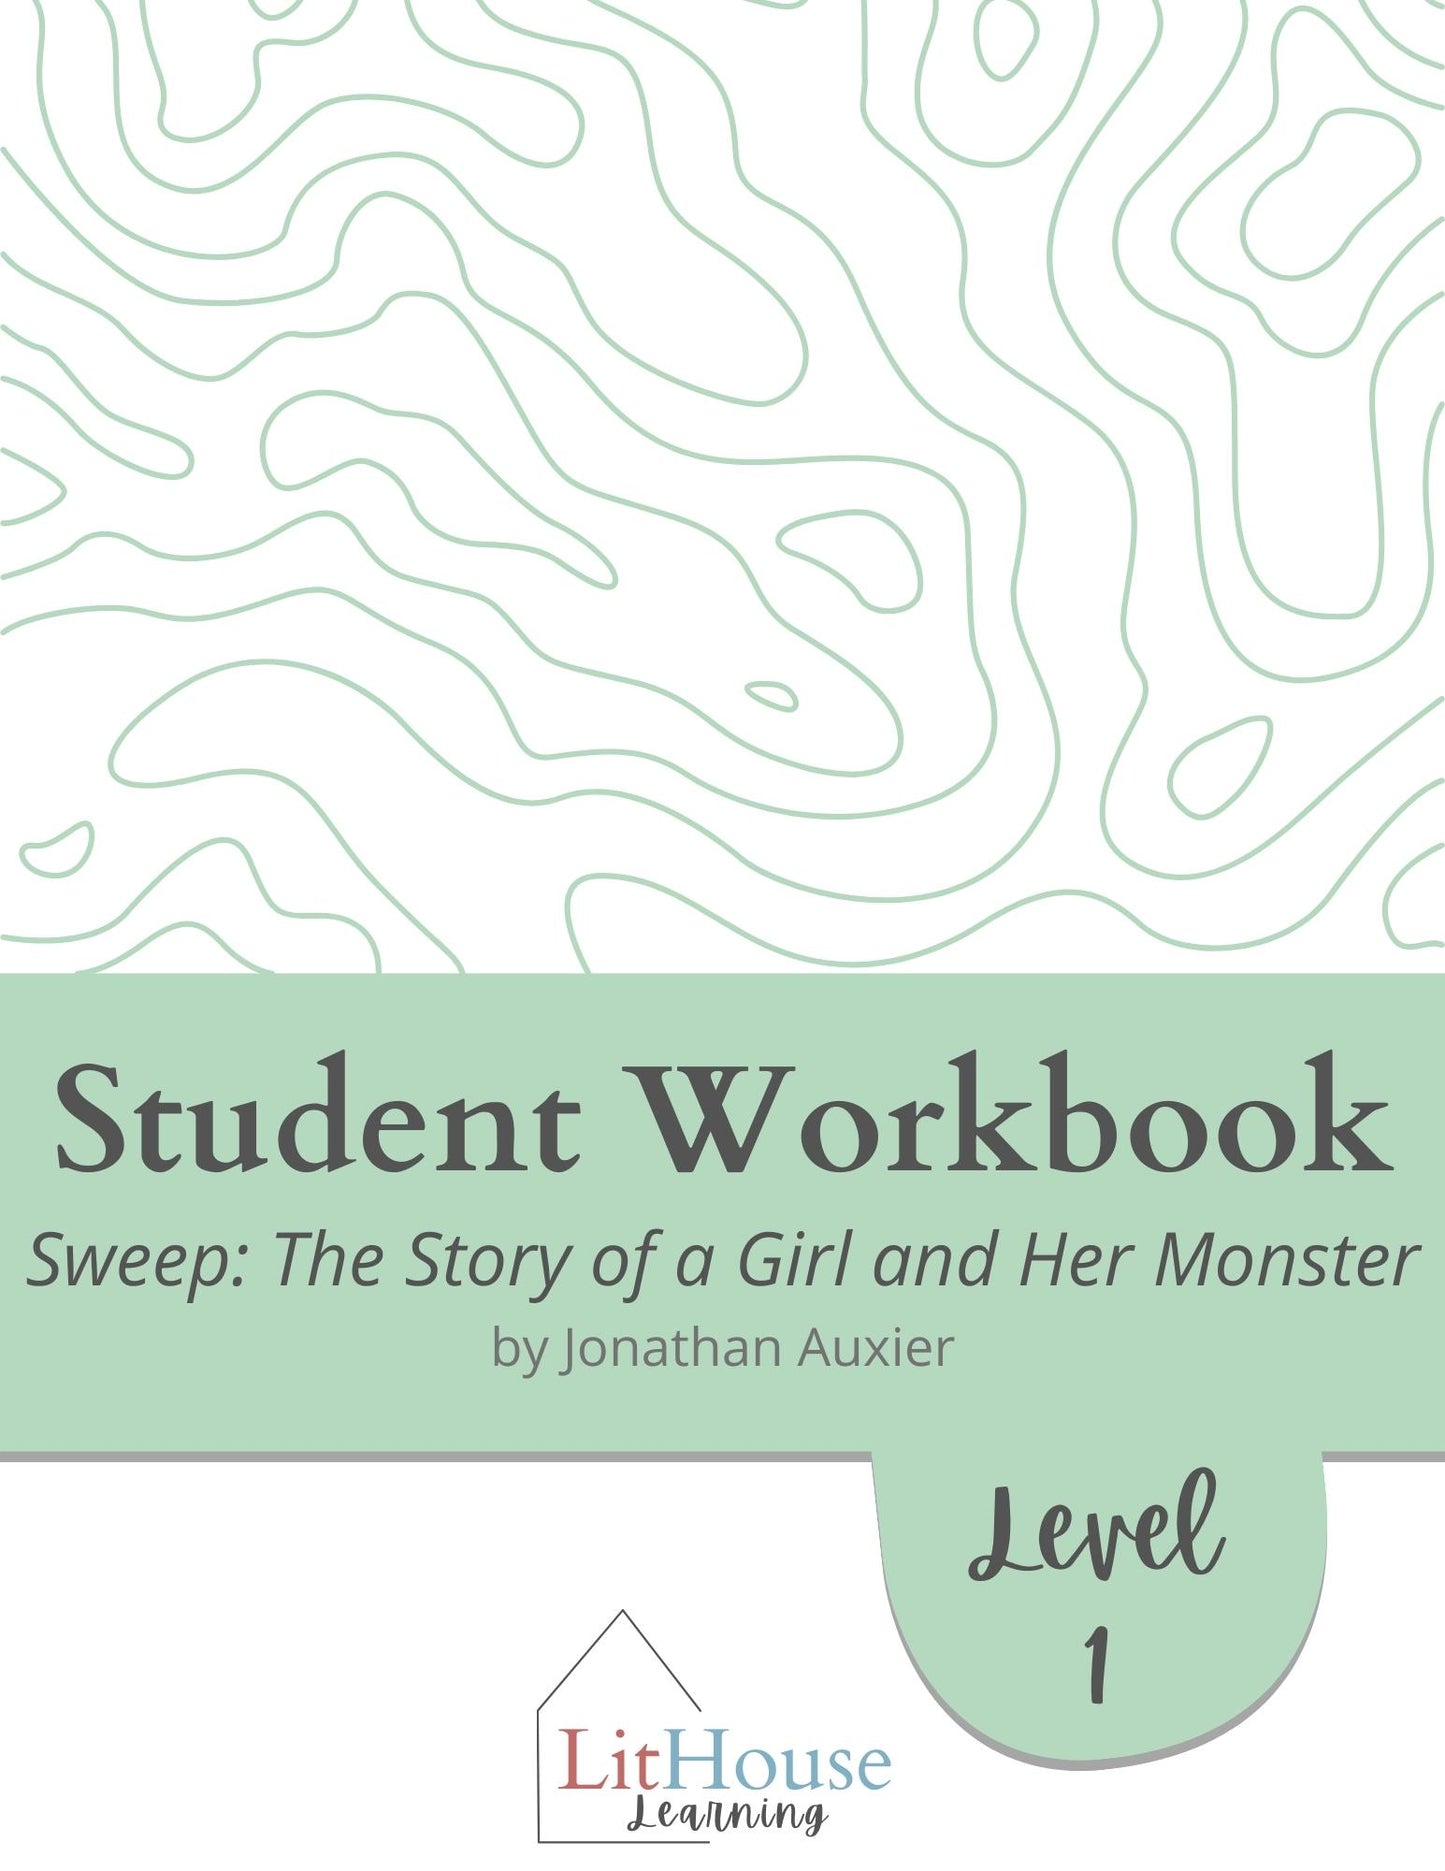 Sweep: The Story of a Girl and Her Monster Novel Study